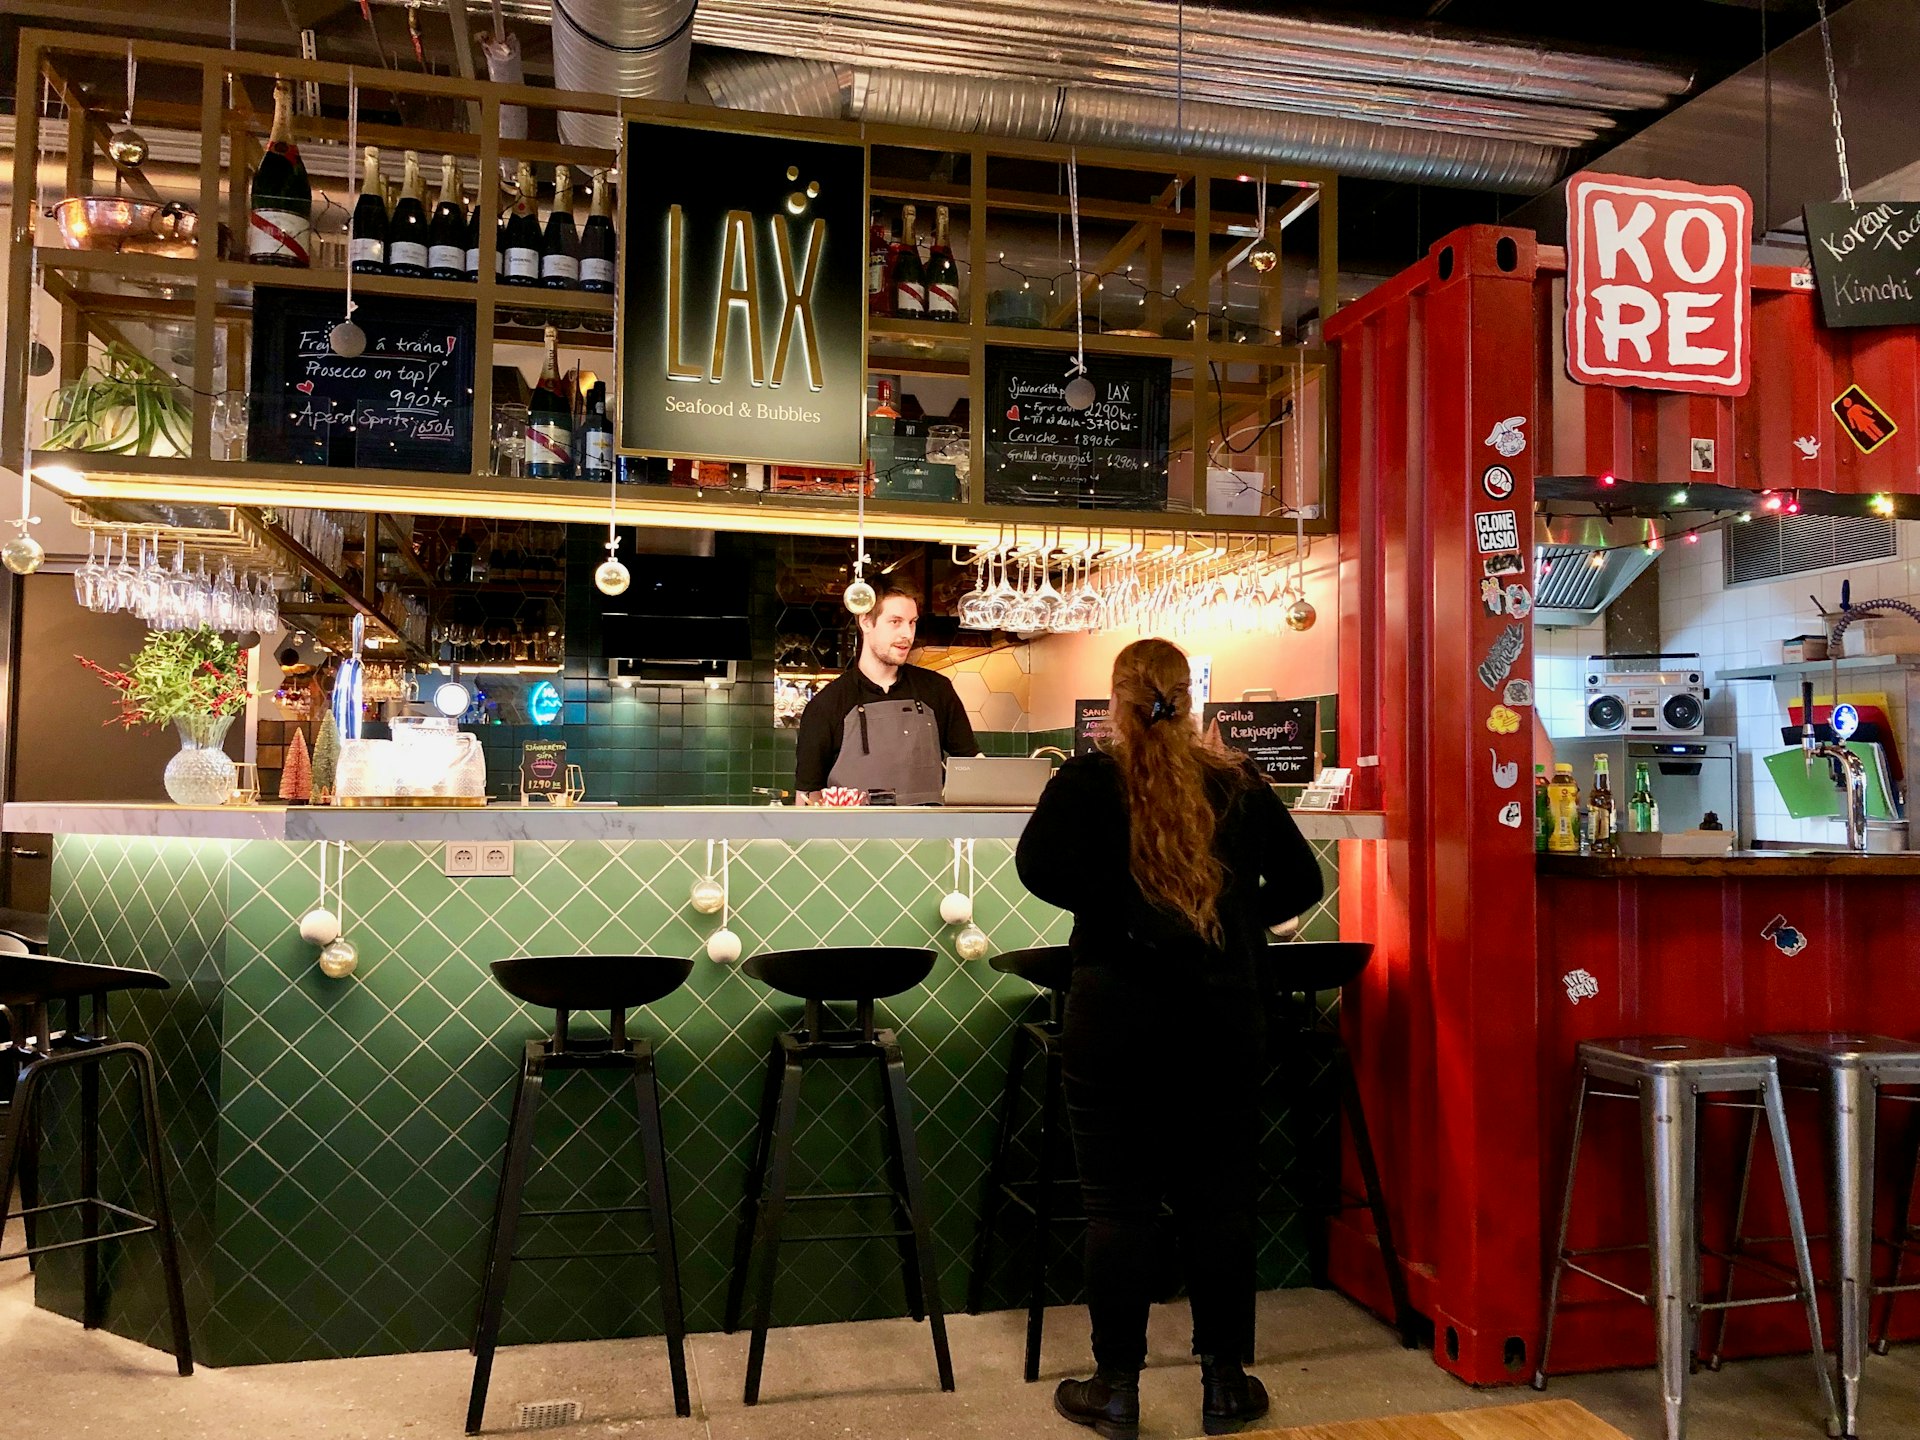 Lax seafood and bubbles inside Grandi Matholl, a street food market established in one of the old harbour's warehouse.